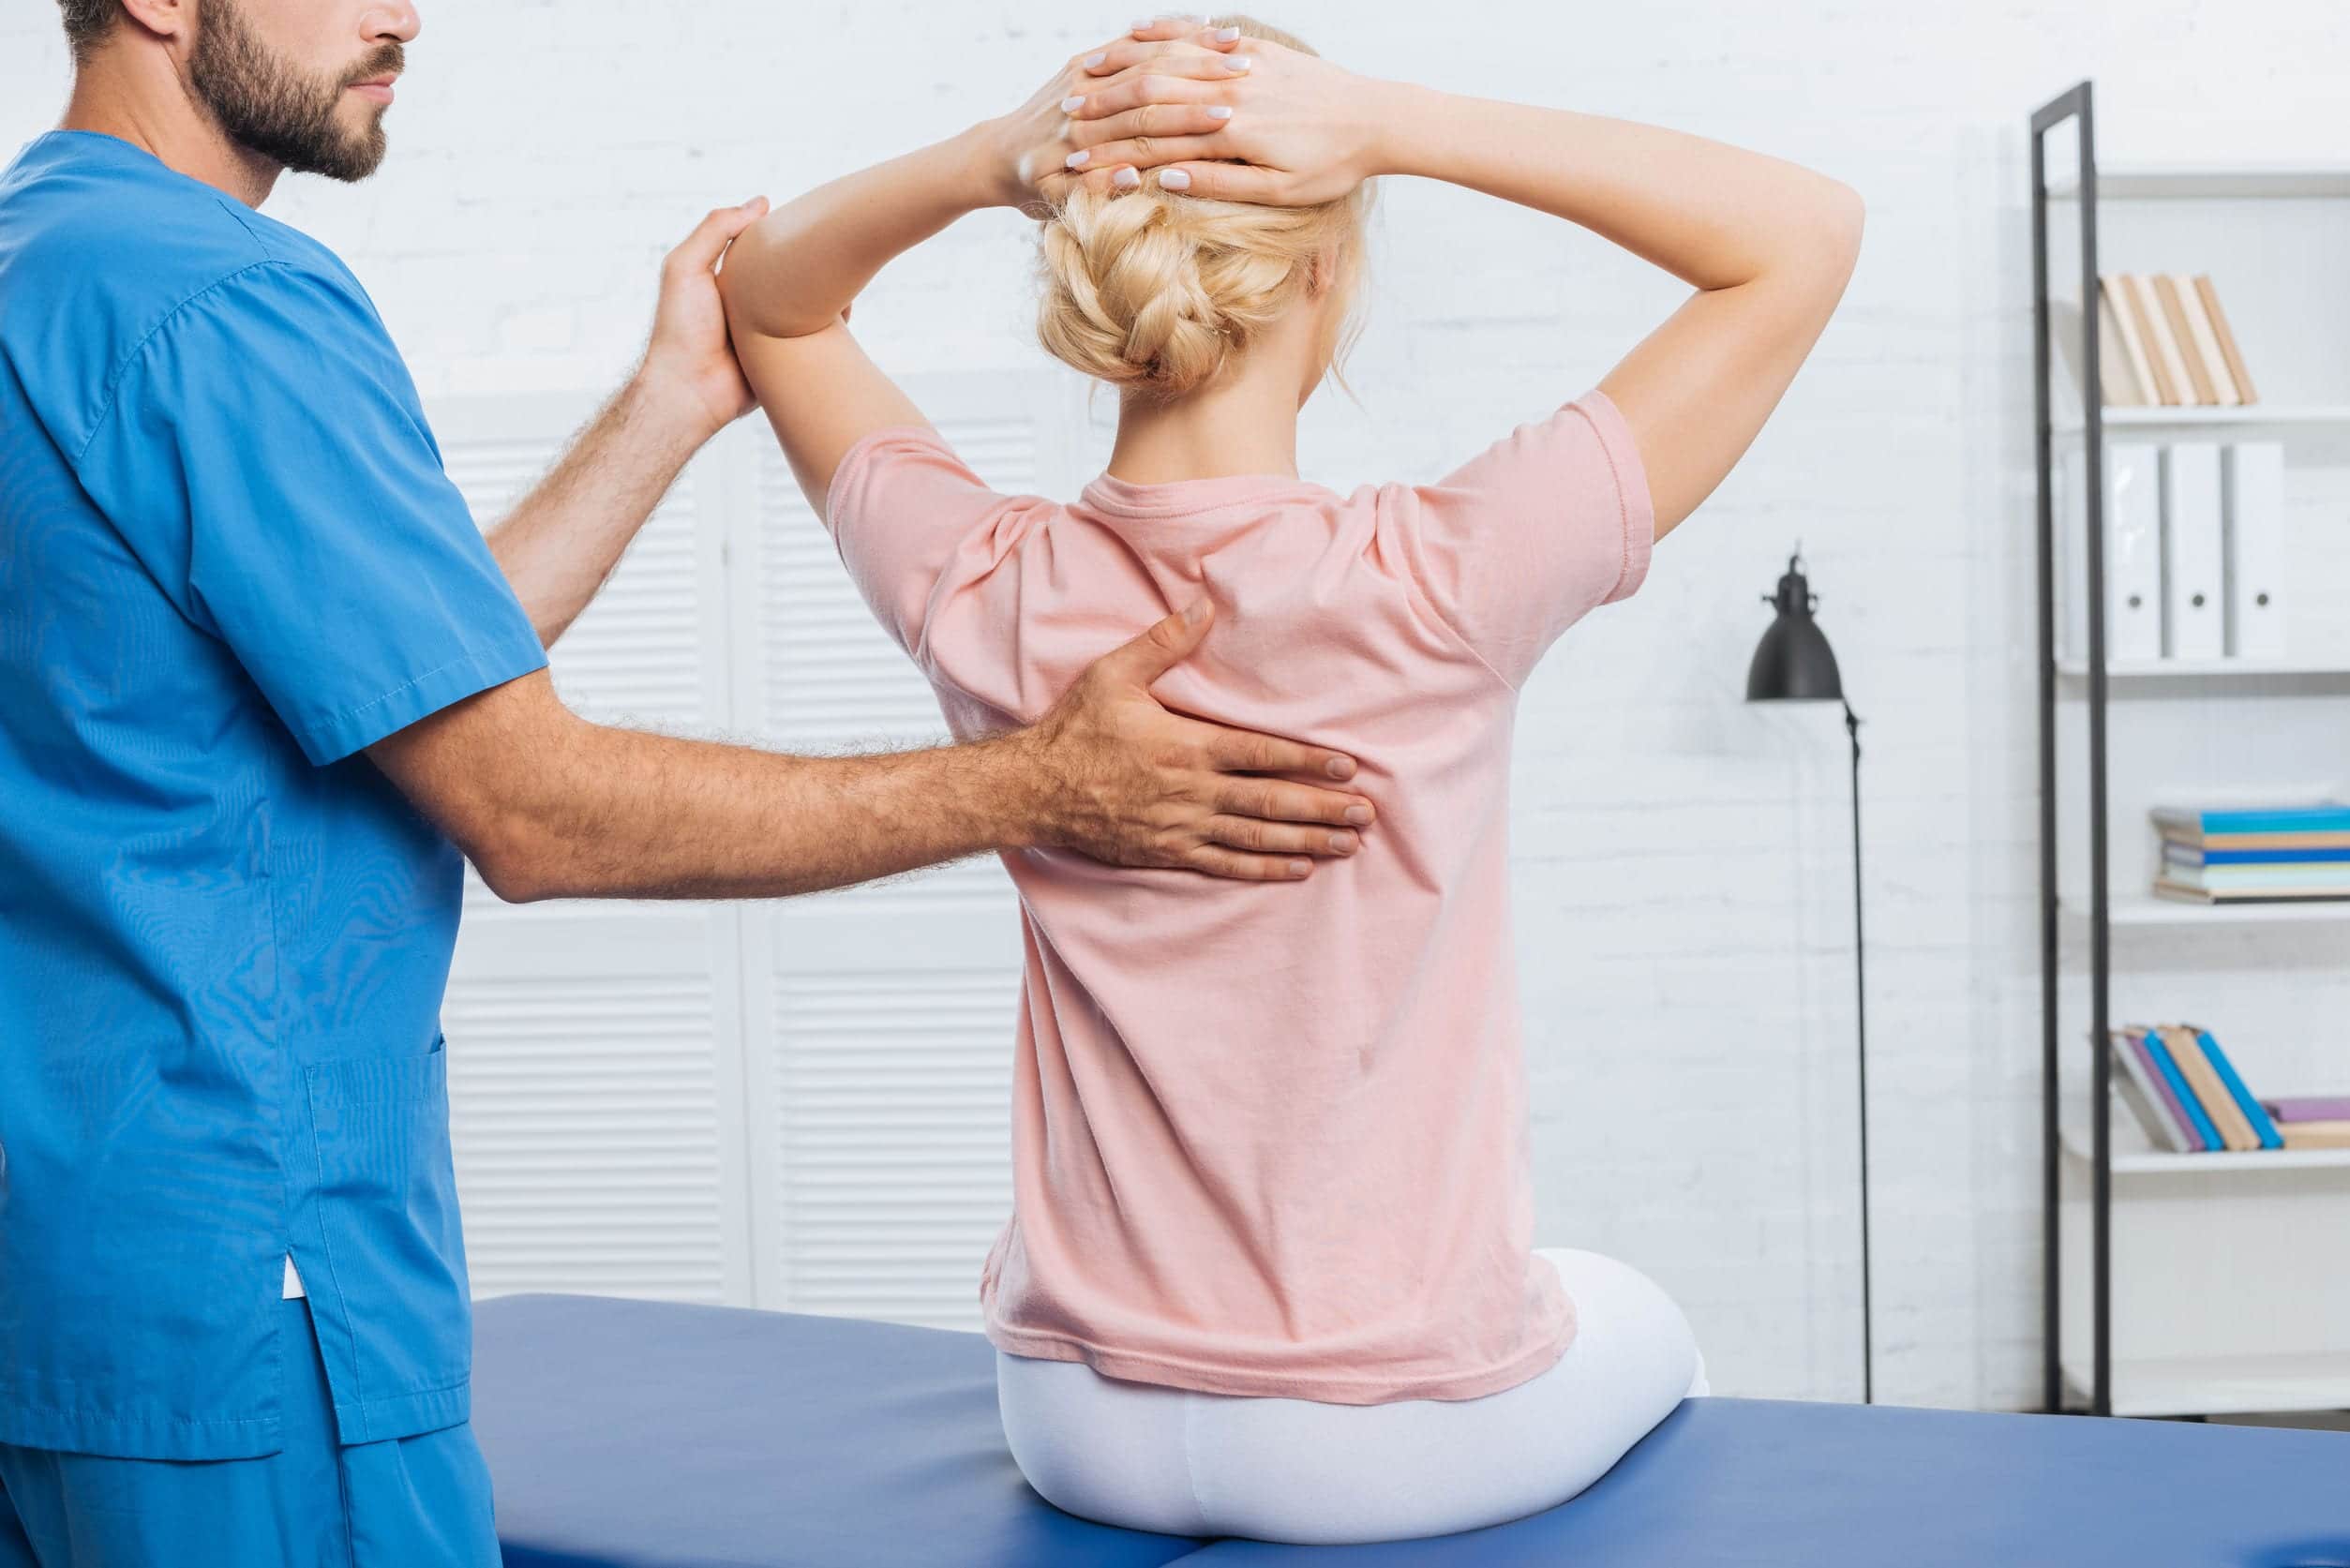 Physical Therapy Can Help With These Types of Accidents